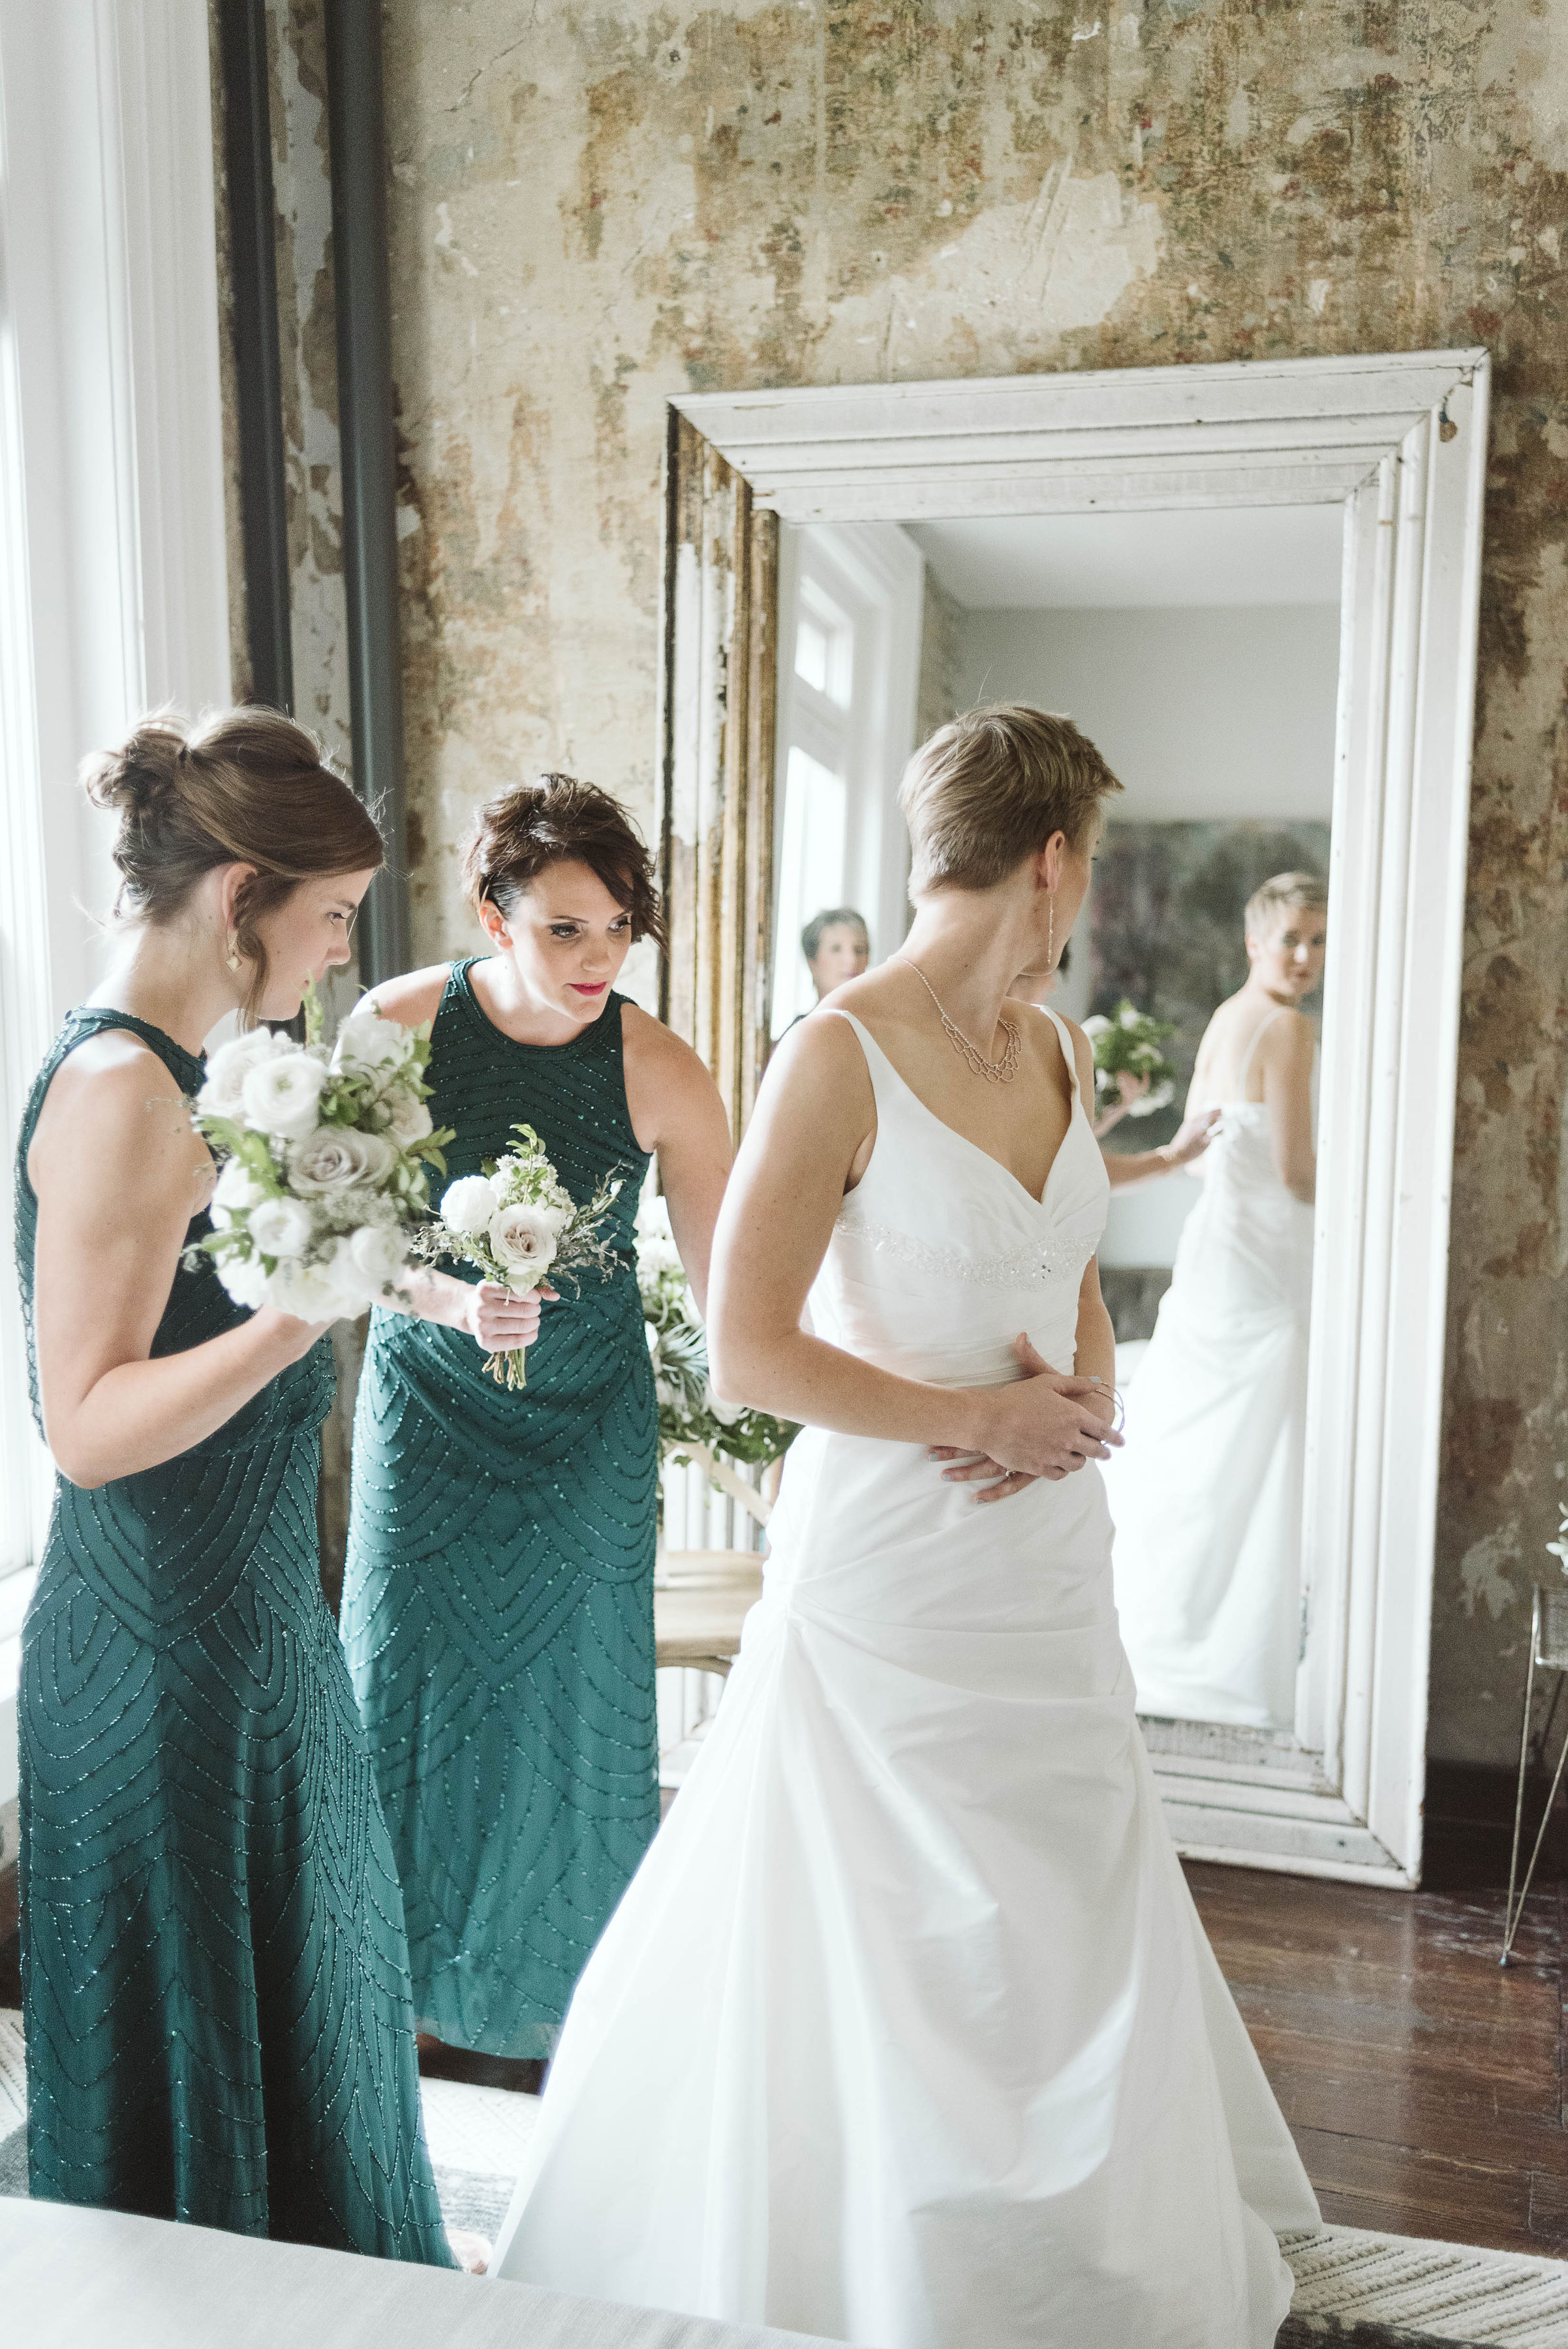 Emerald bridesmaid dresses with white and neutral bouquets // Nashville Wedding Flowers